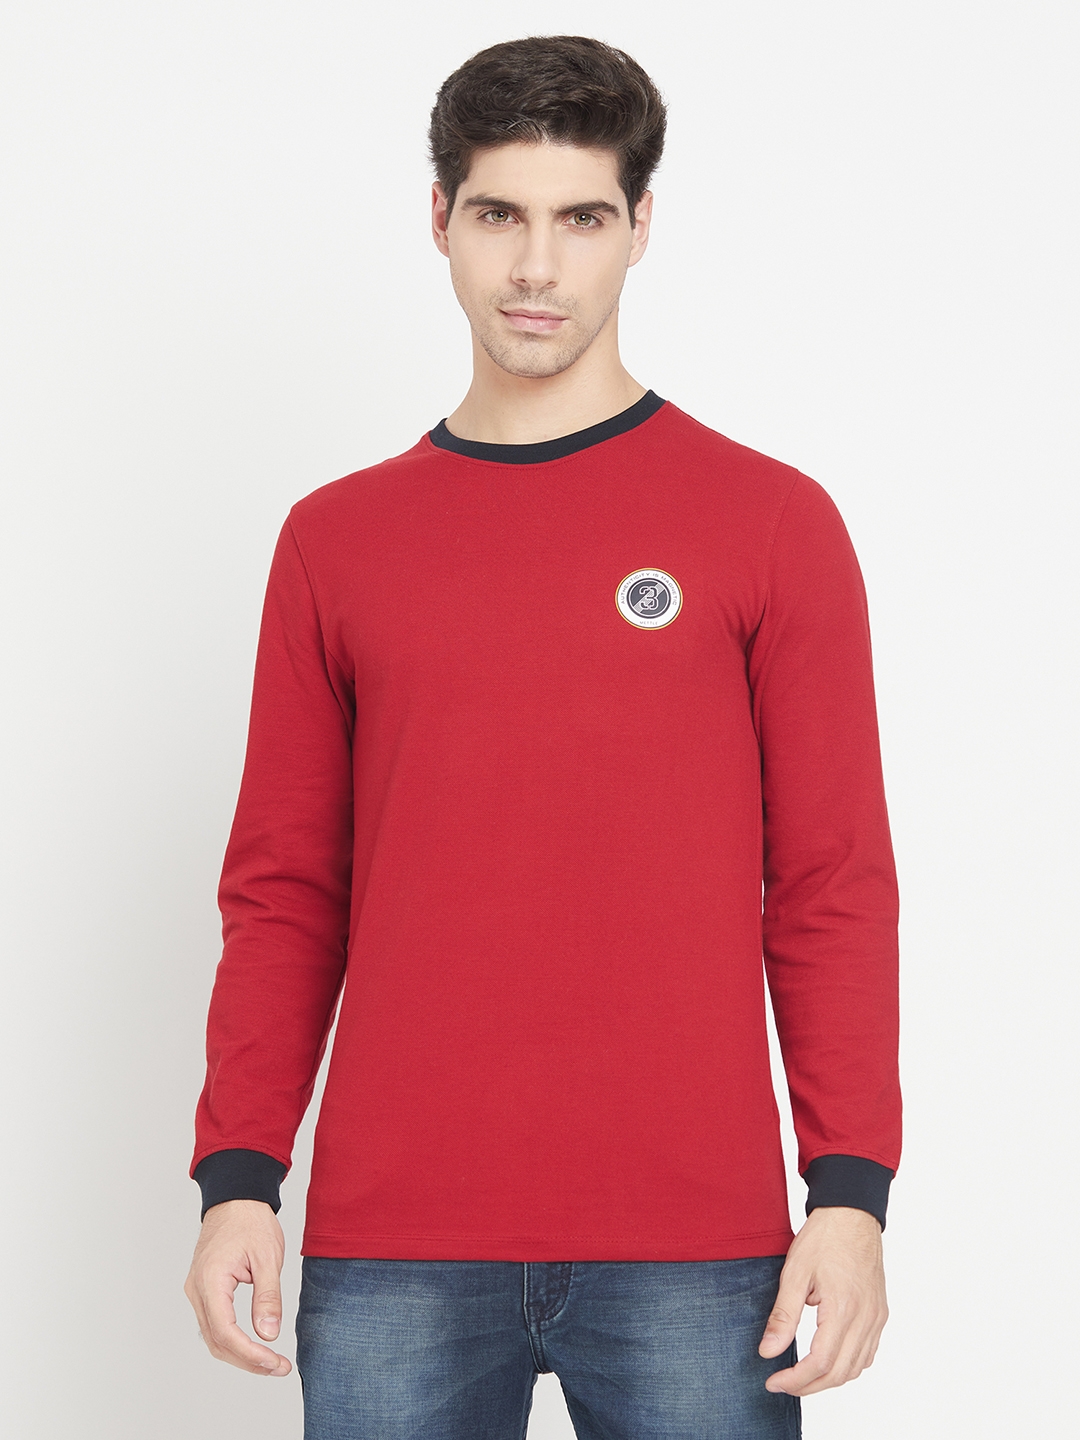 METTLE |  Maroon Applique Round Neck Full Sleeve T-shirt